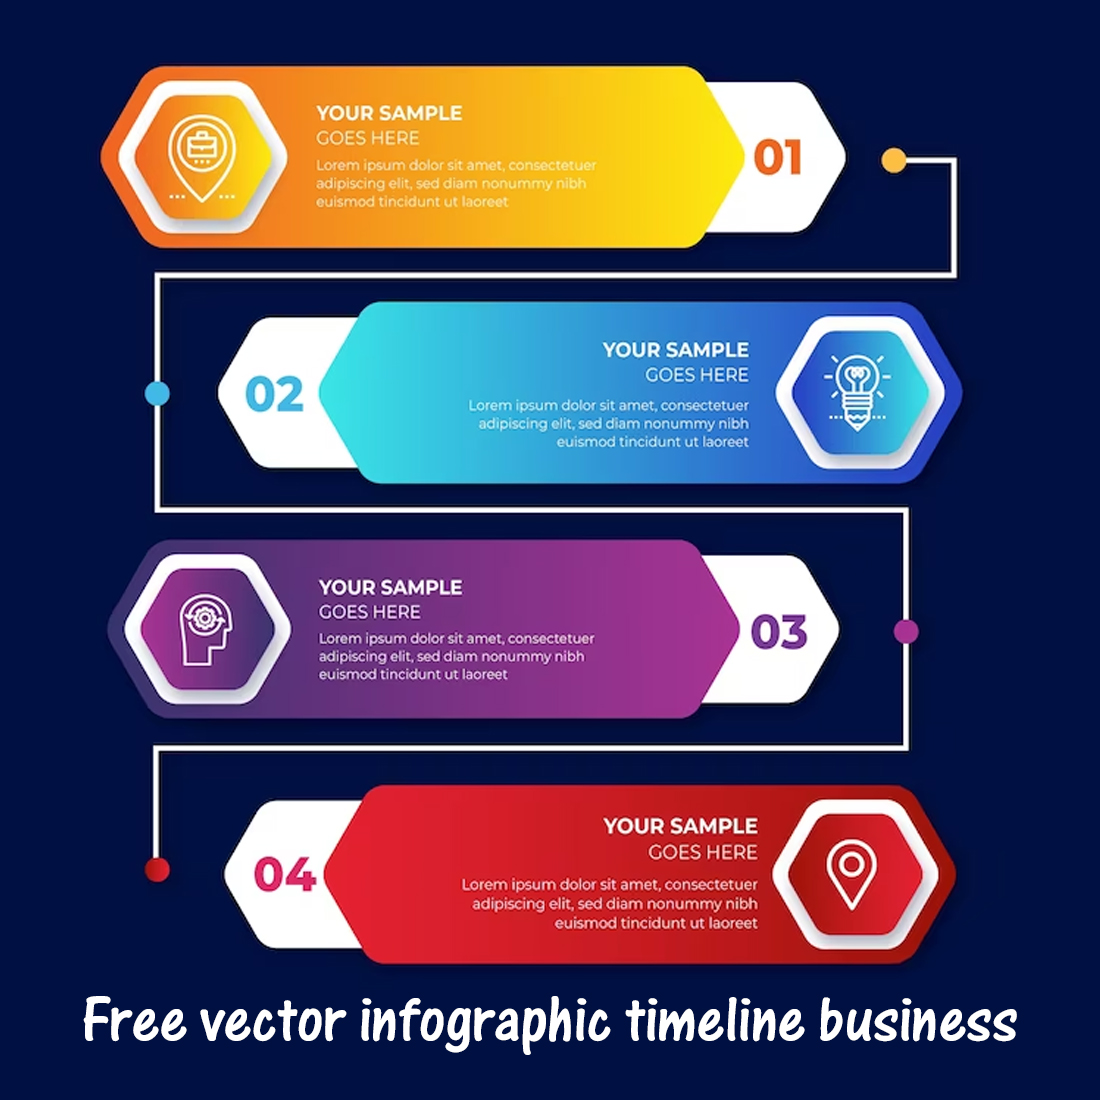 infographic timeline business cover image.